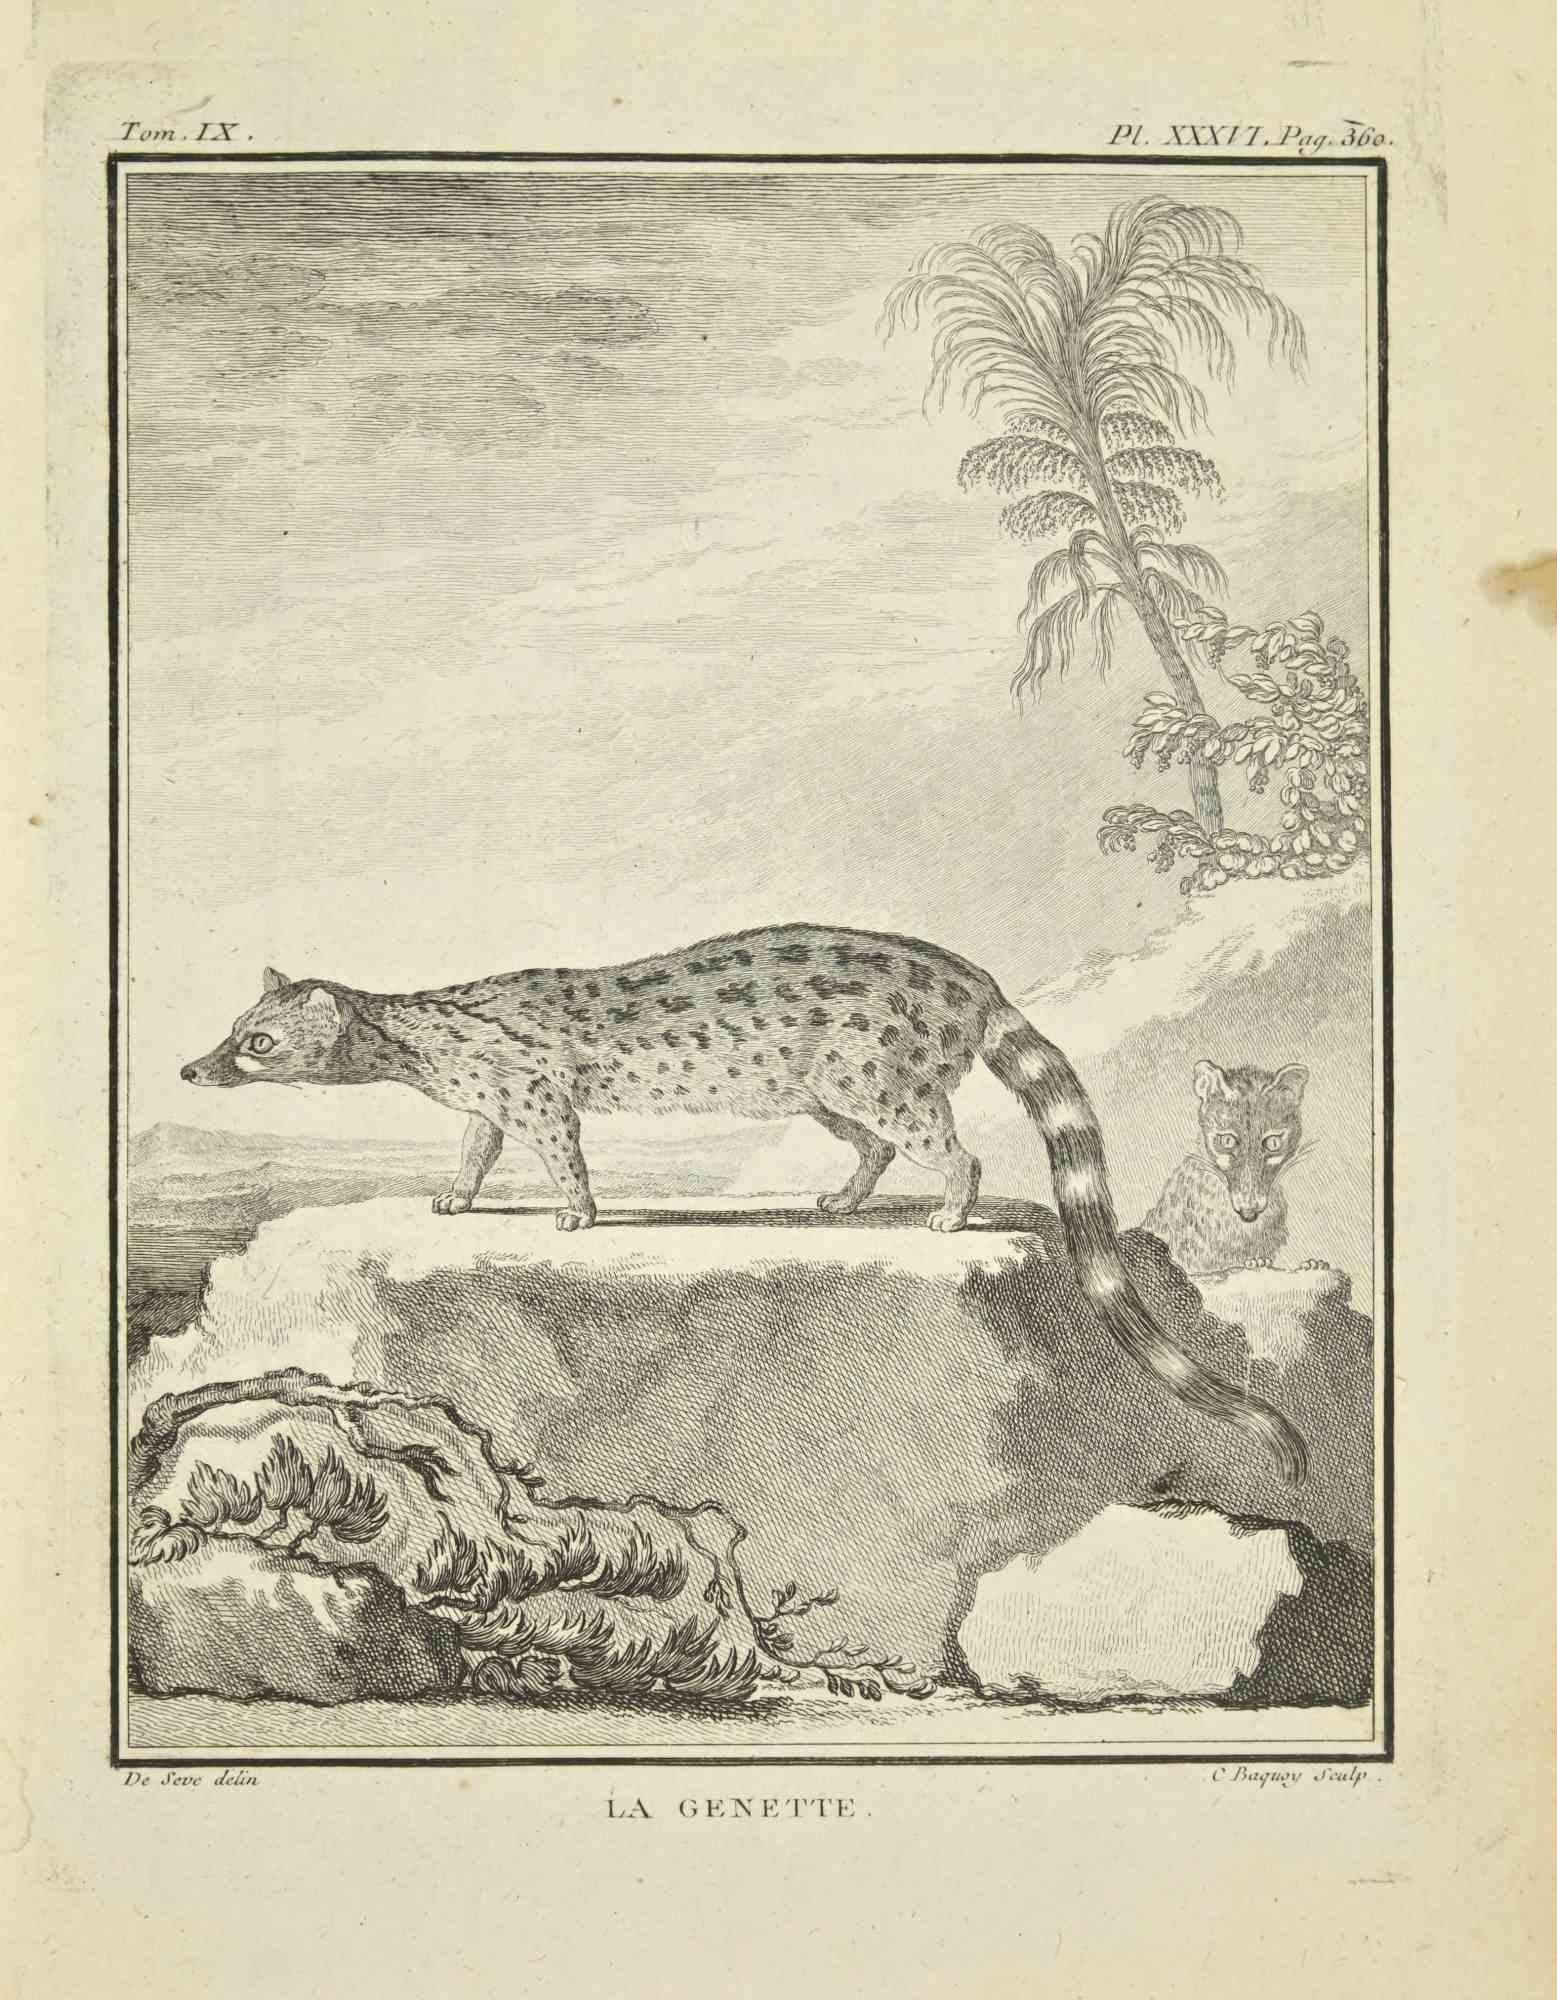 La Genette is an etching realized by Jean Charles Baquoy in 1771.

It belongs to the suite "Histoire Naturelle de Buffon".

The Artist's signature is engraved lower right.

Good conditions with slight foxing.